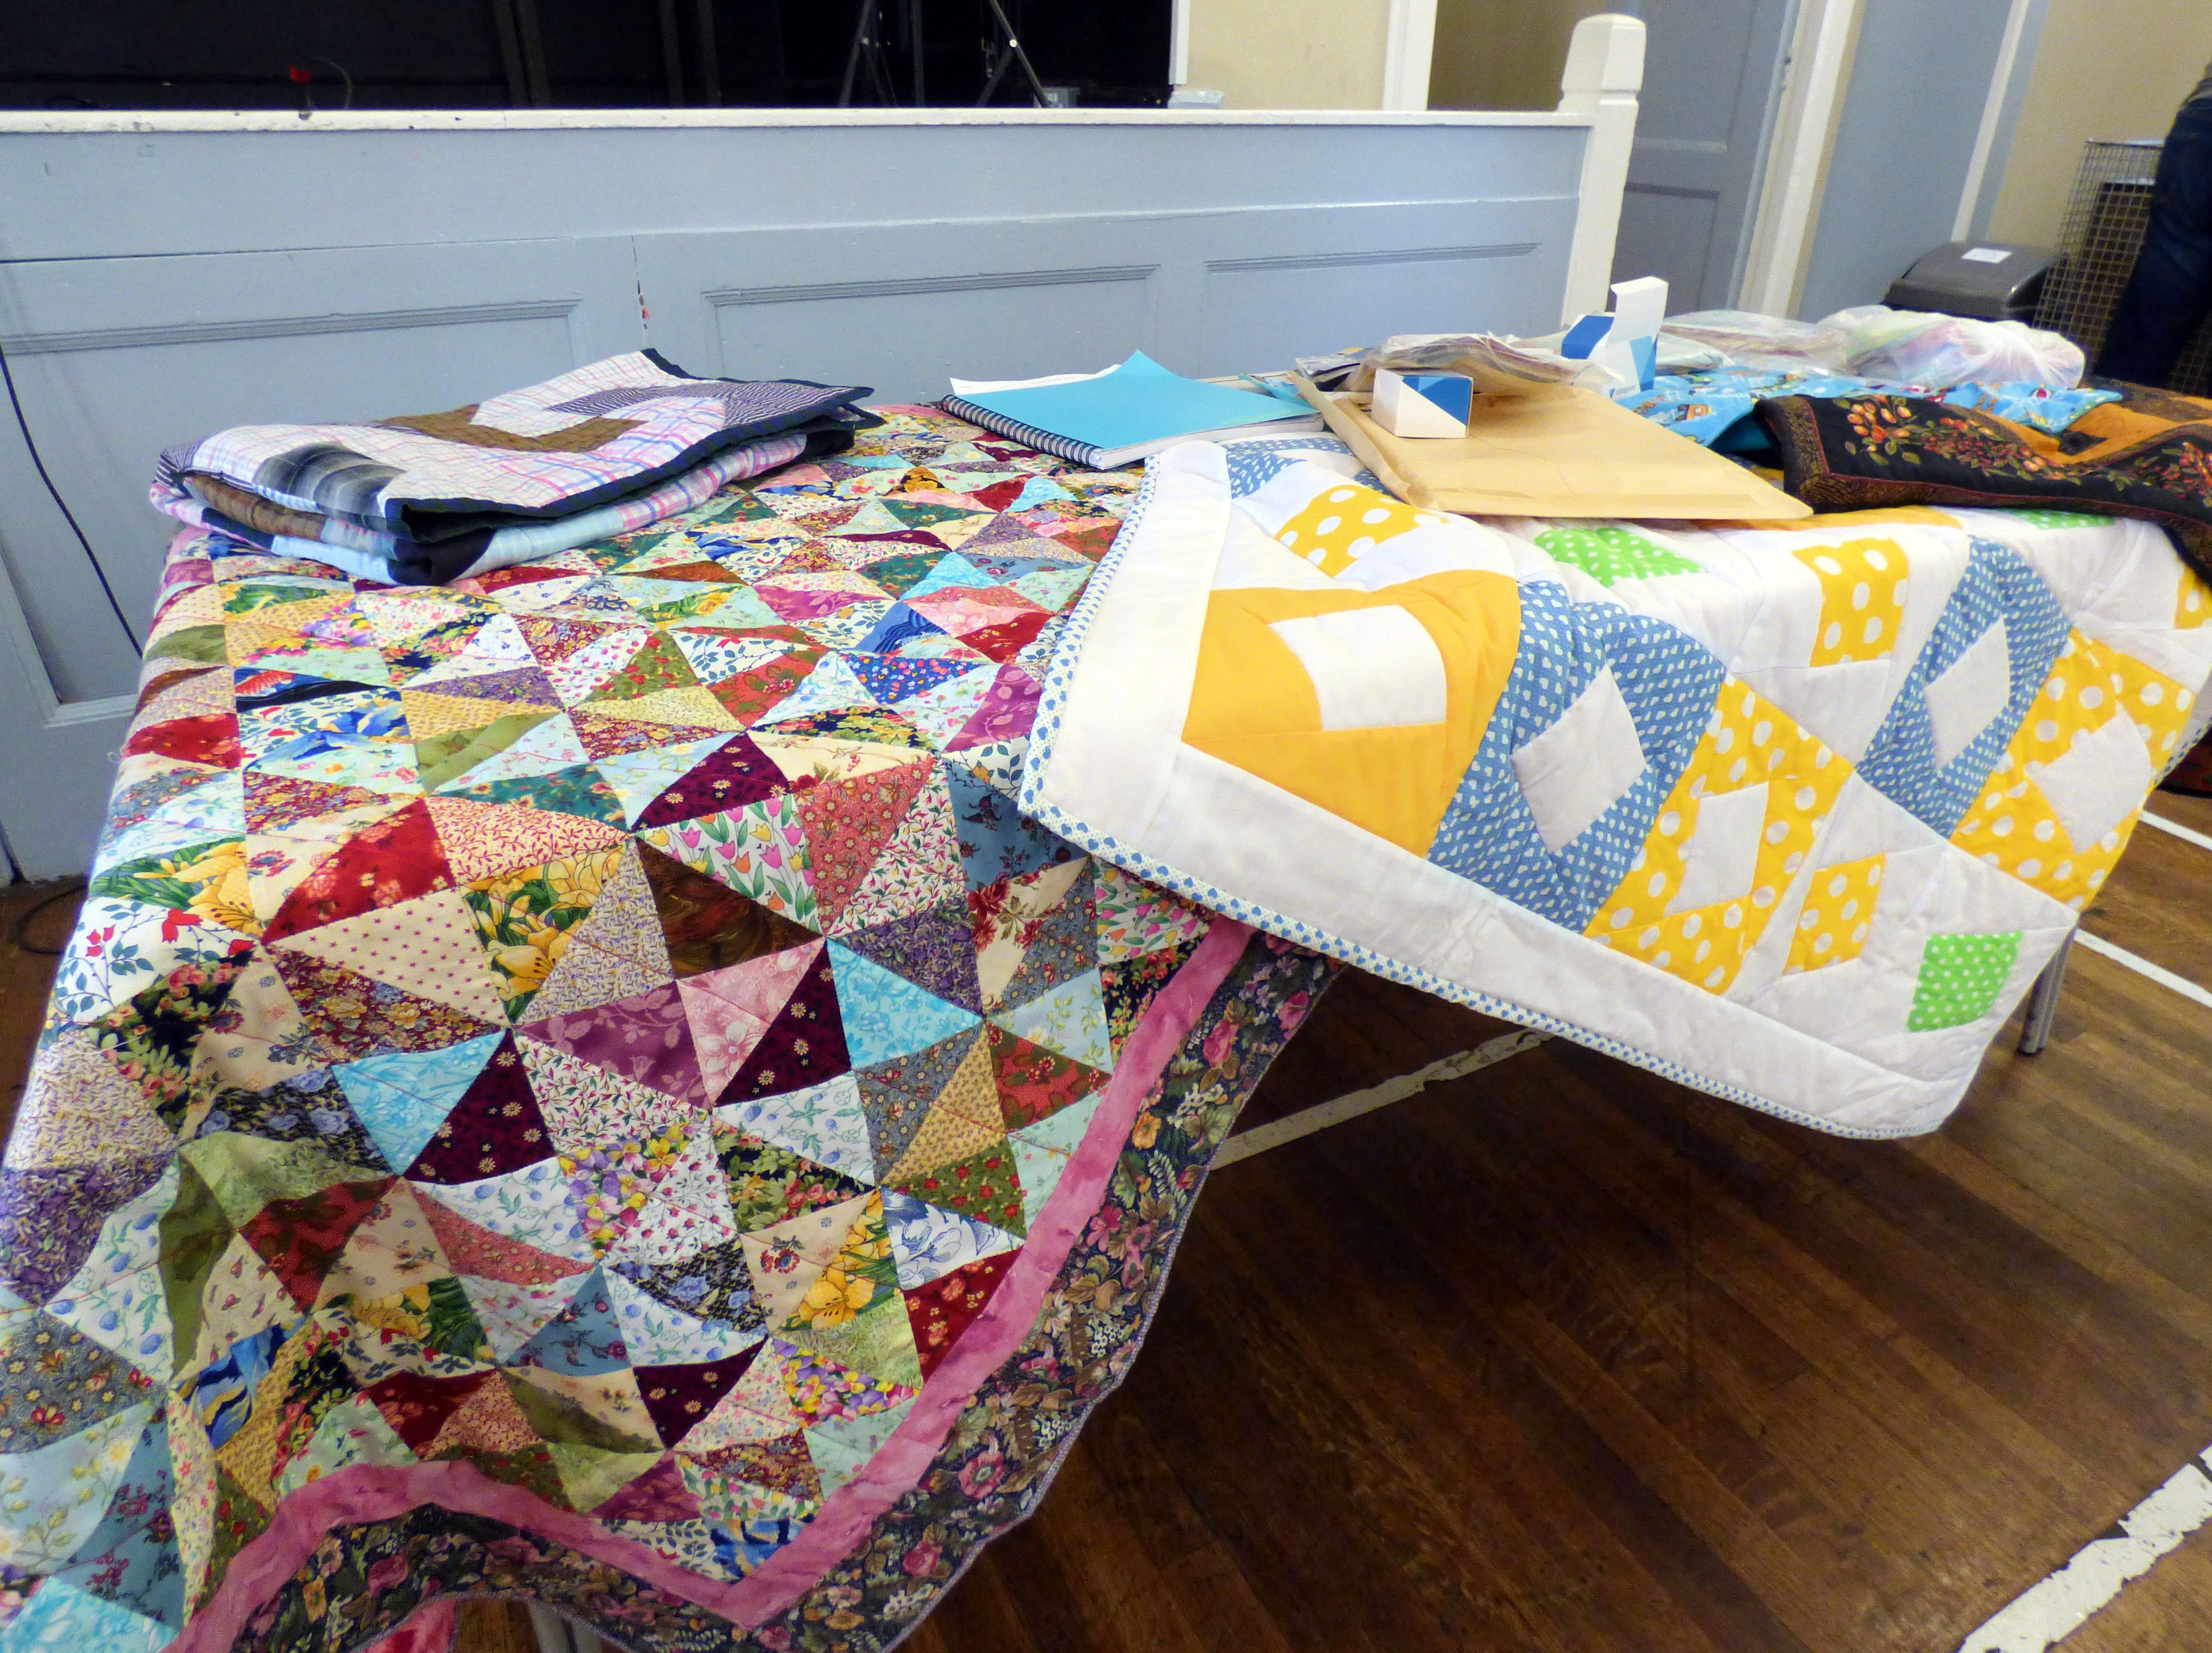 donated quilts and blankets at Talk by Caroline Fogell from Project Linus